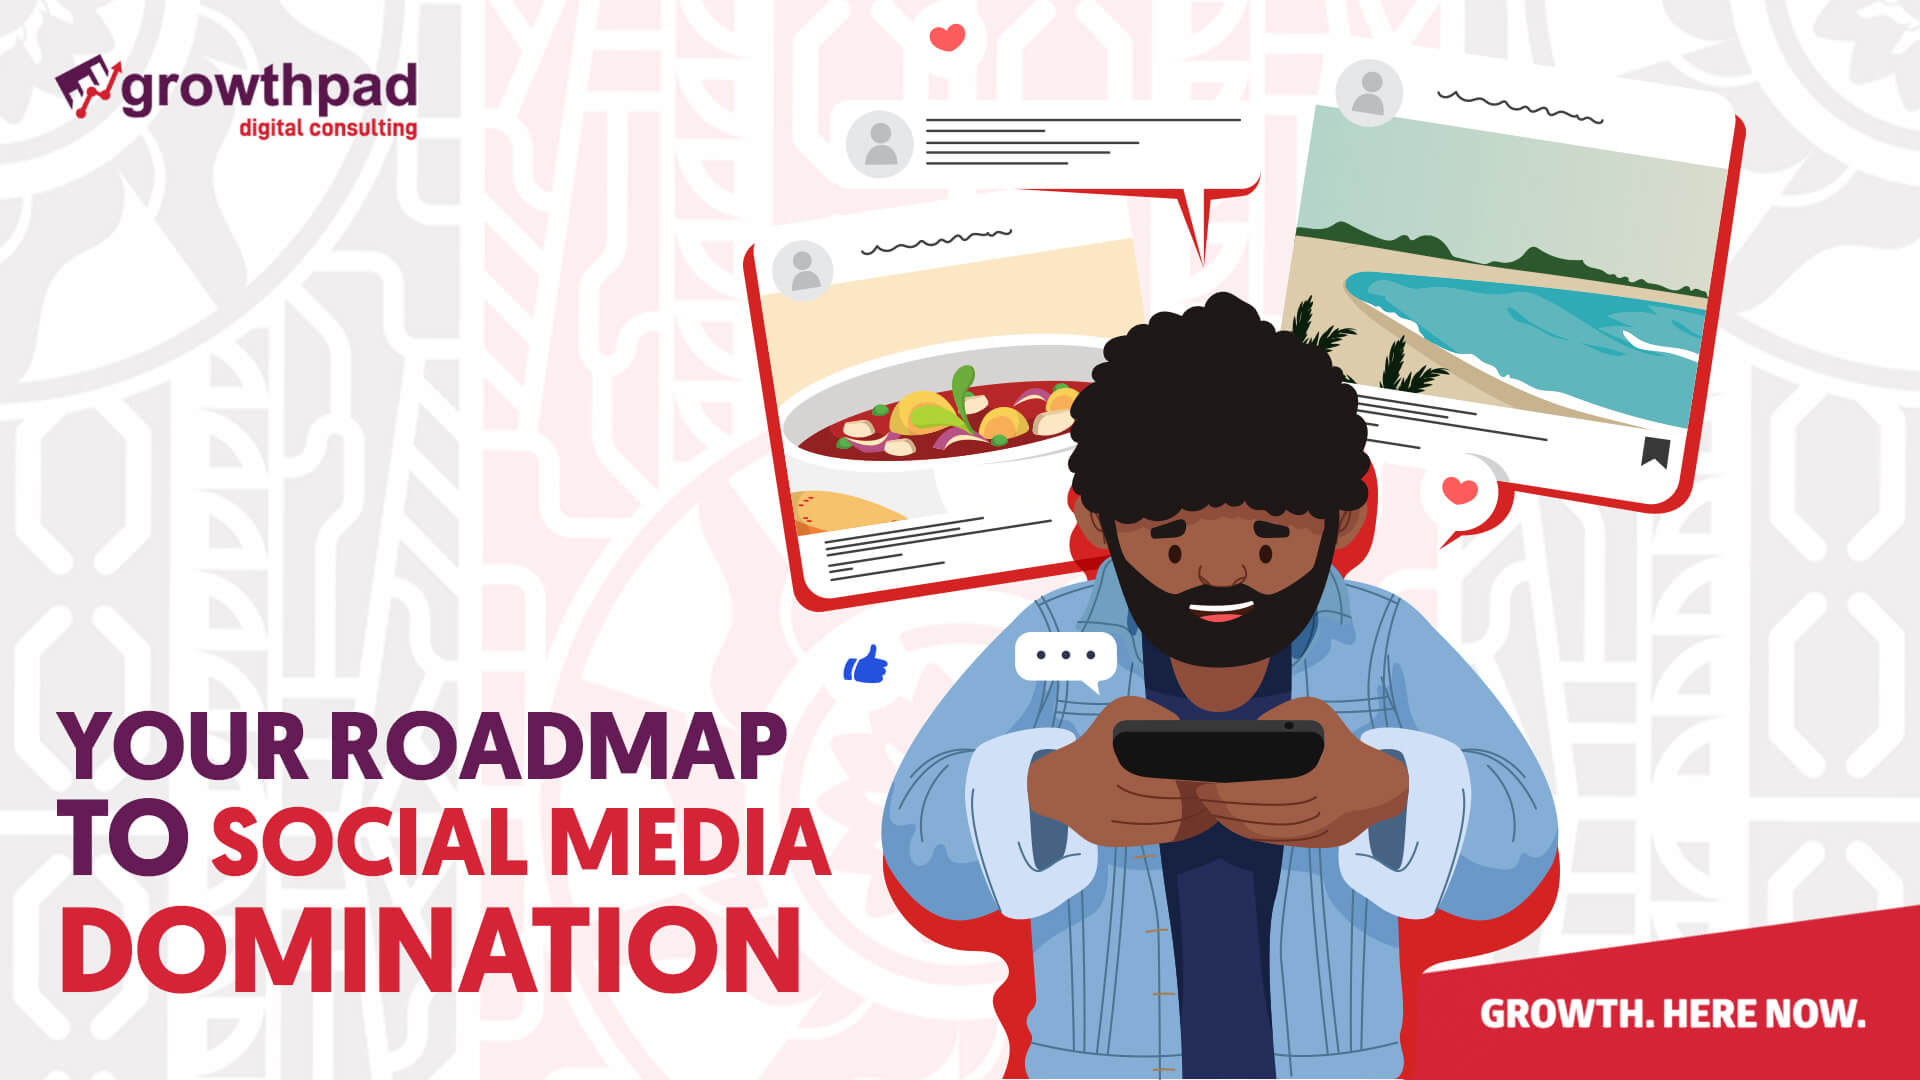 Your roadmap to social media domination